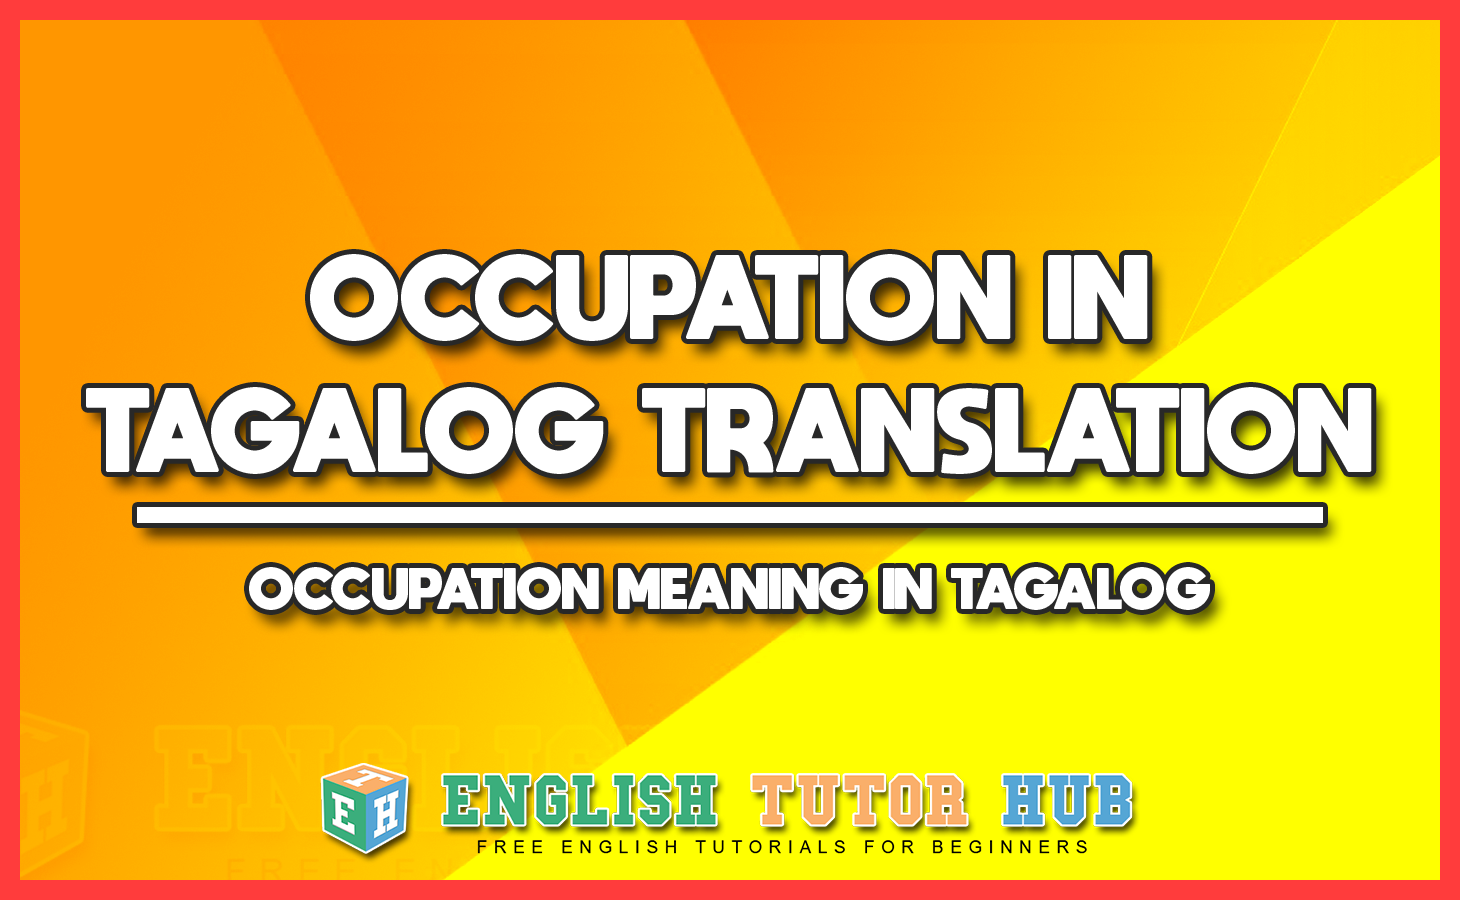 OCCUPATION IN TAGALOG TRANSLATION - OCCUPATION MEANING IN TAGALOG